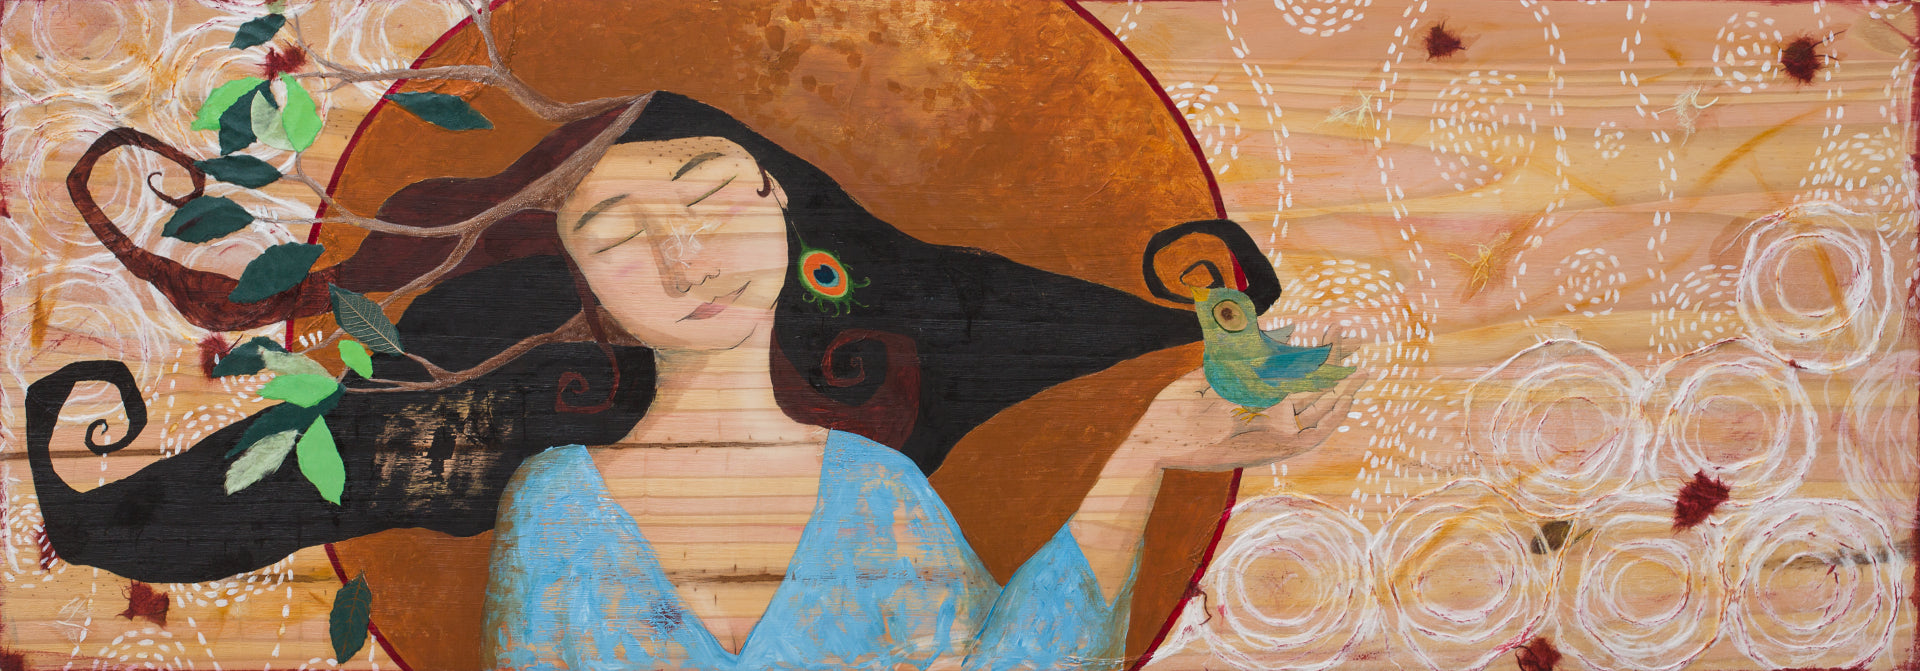 Painting of a woman and a bird on natural wood.  The woman has her head tilted to the left and her eyes closed.  Her hair is black and brown and curly, with tree branches growing out of it.  She is holding an irridescent green bird in her hand.  Behind here is a golden circle with a red border.  in the background are white circles and dots.